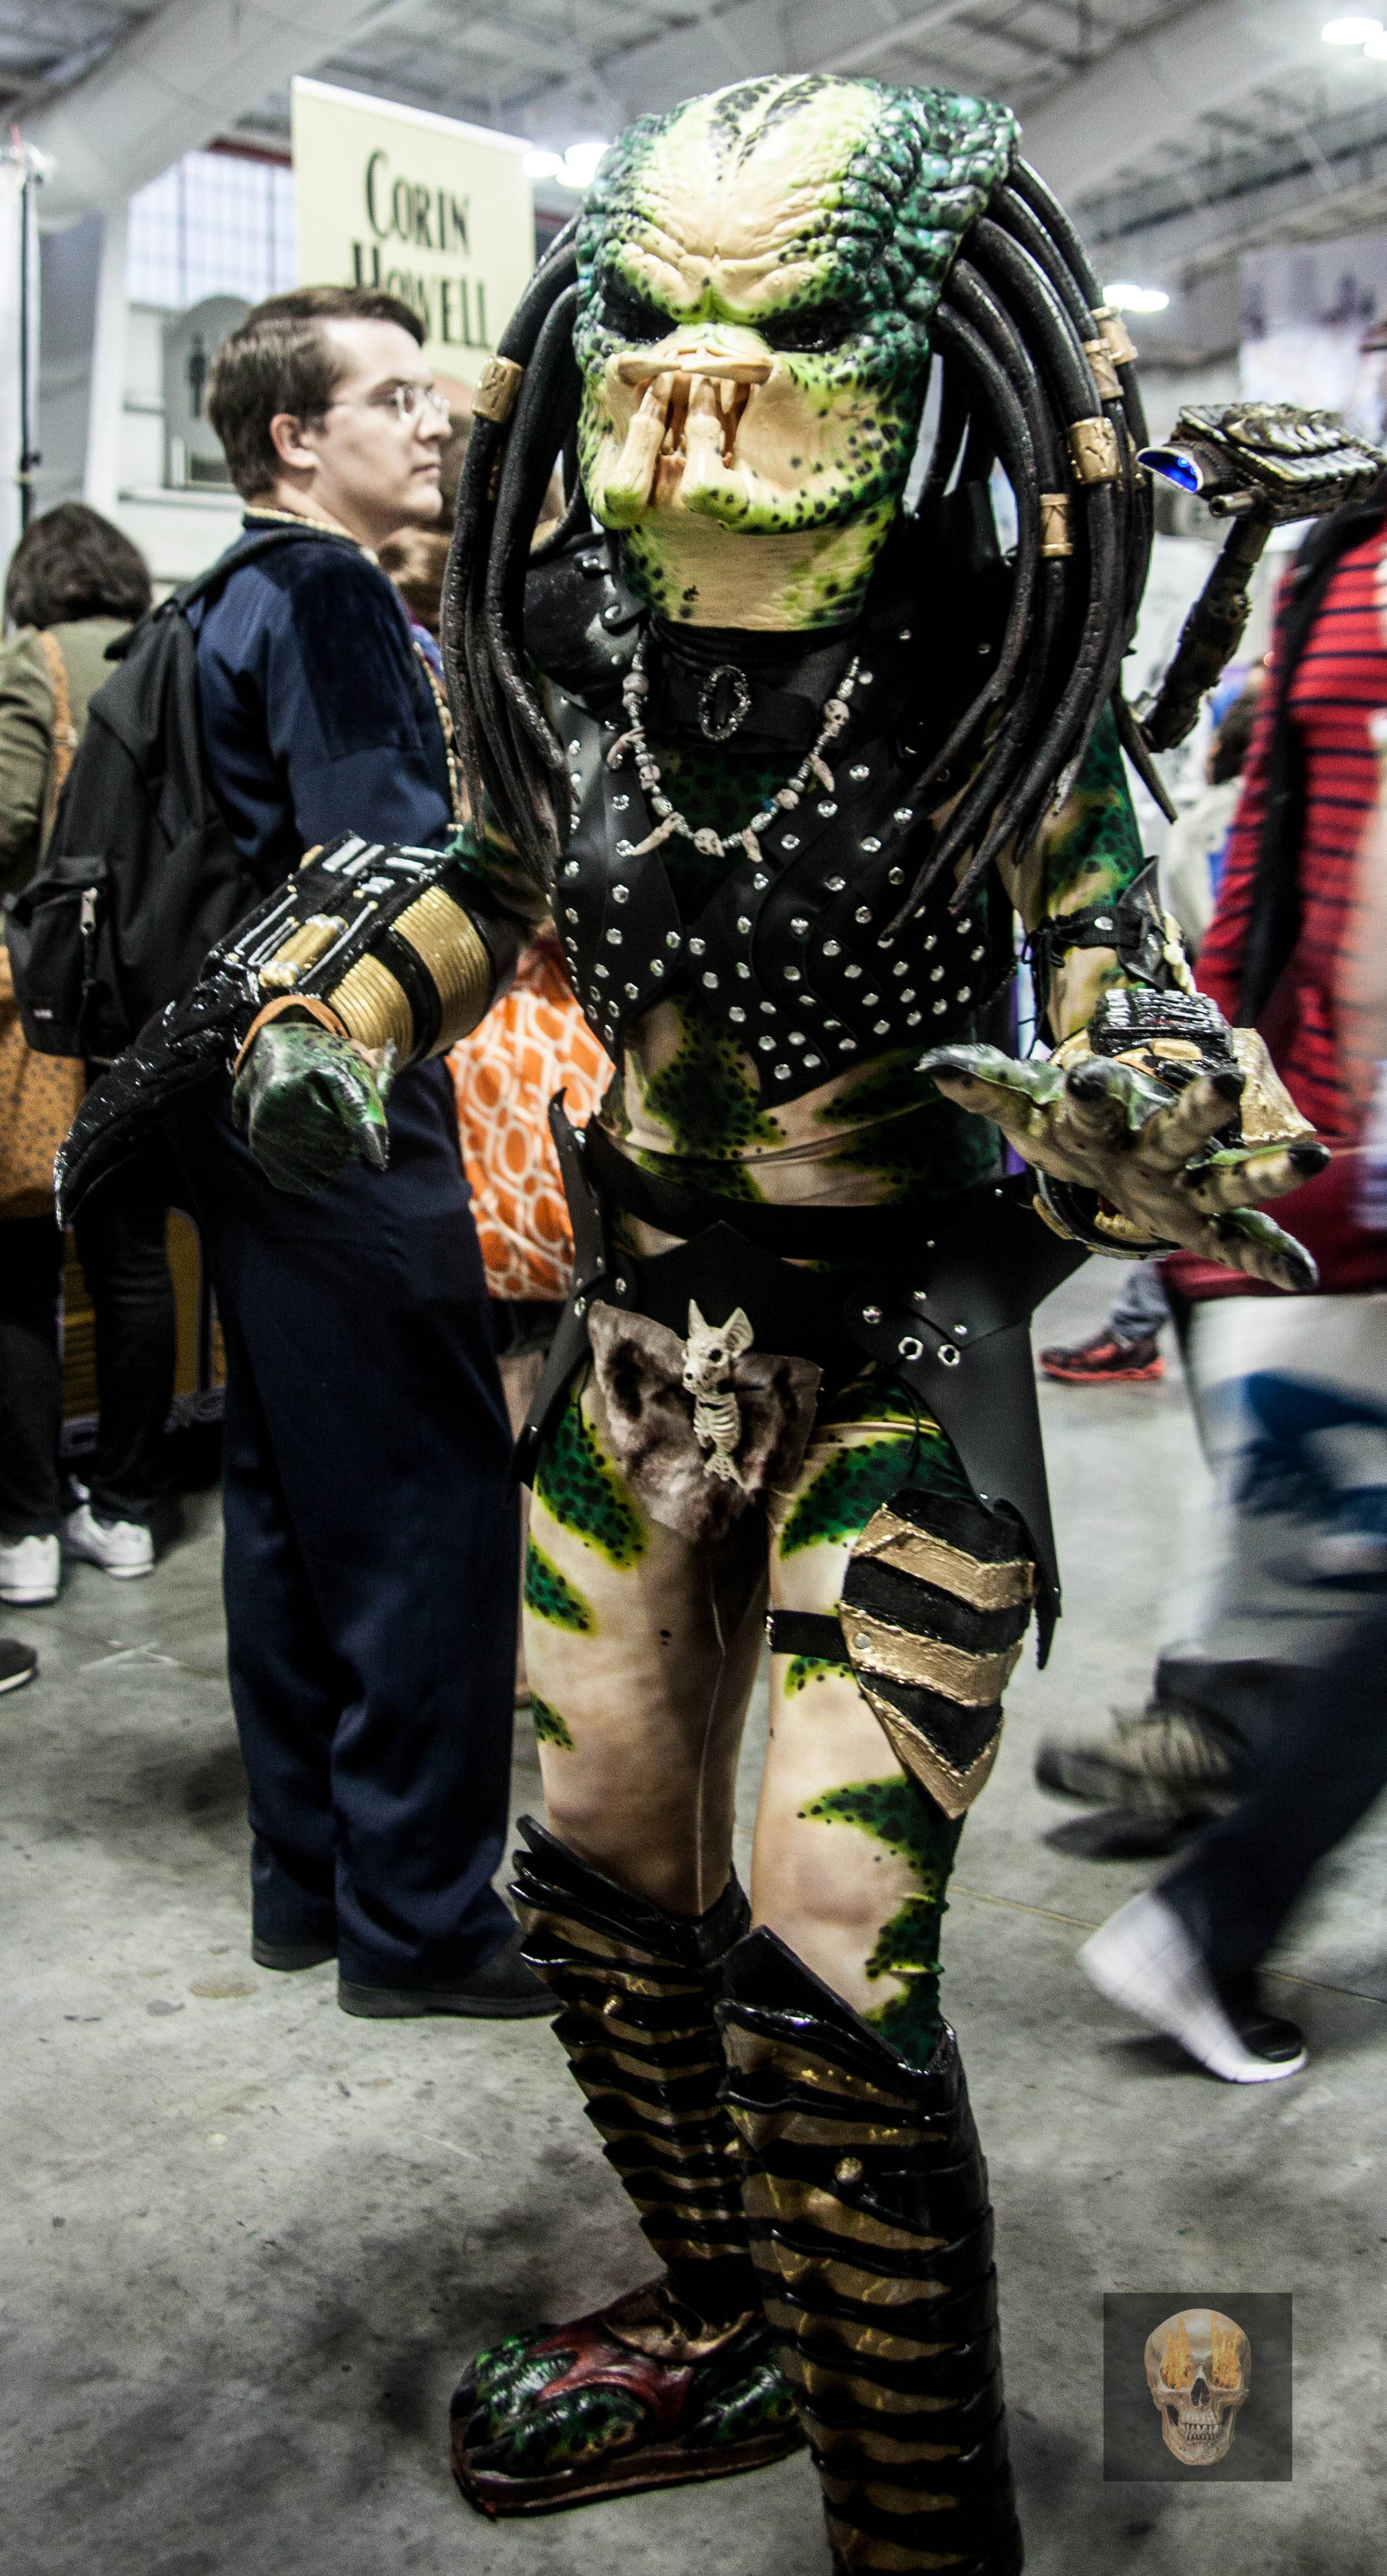 NYCC 2016 (20 of 31)